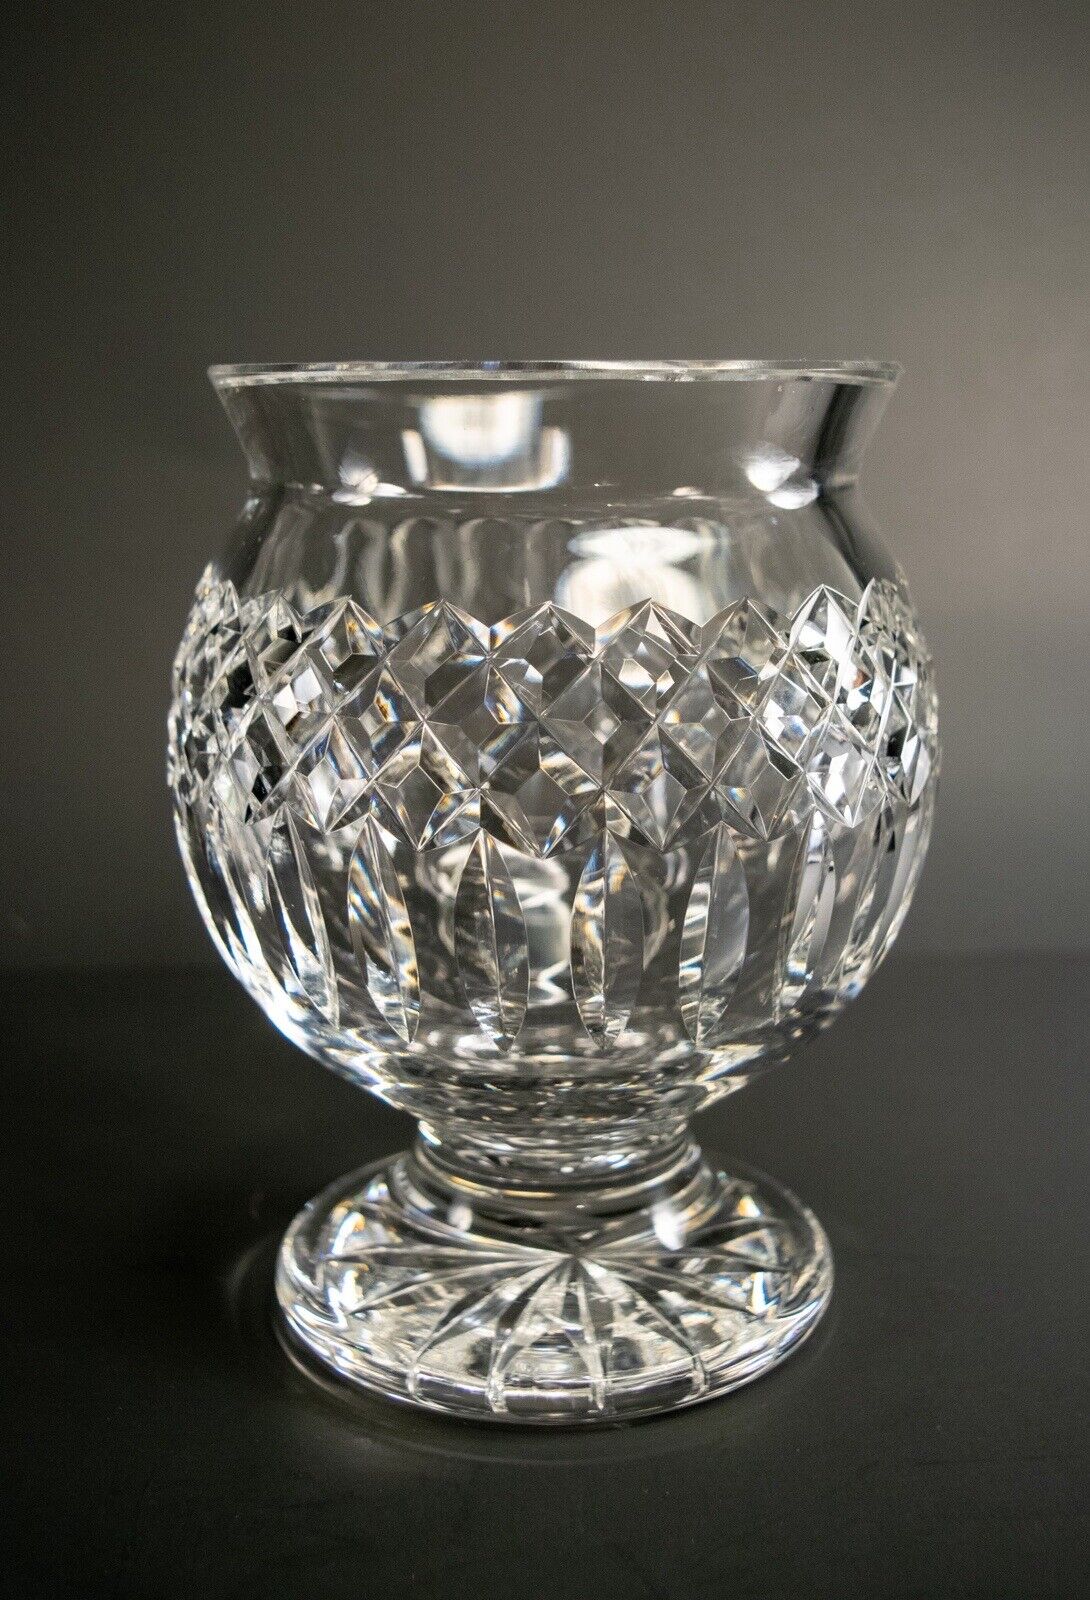 VTG- Waterford Crystal Footed Bouquet Vase